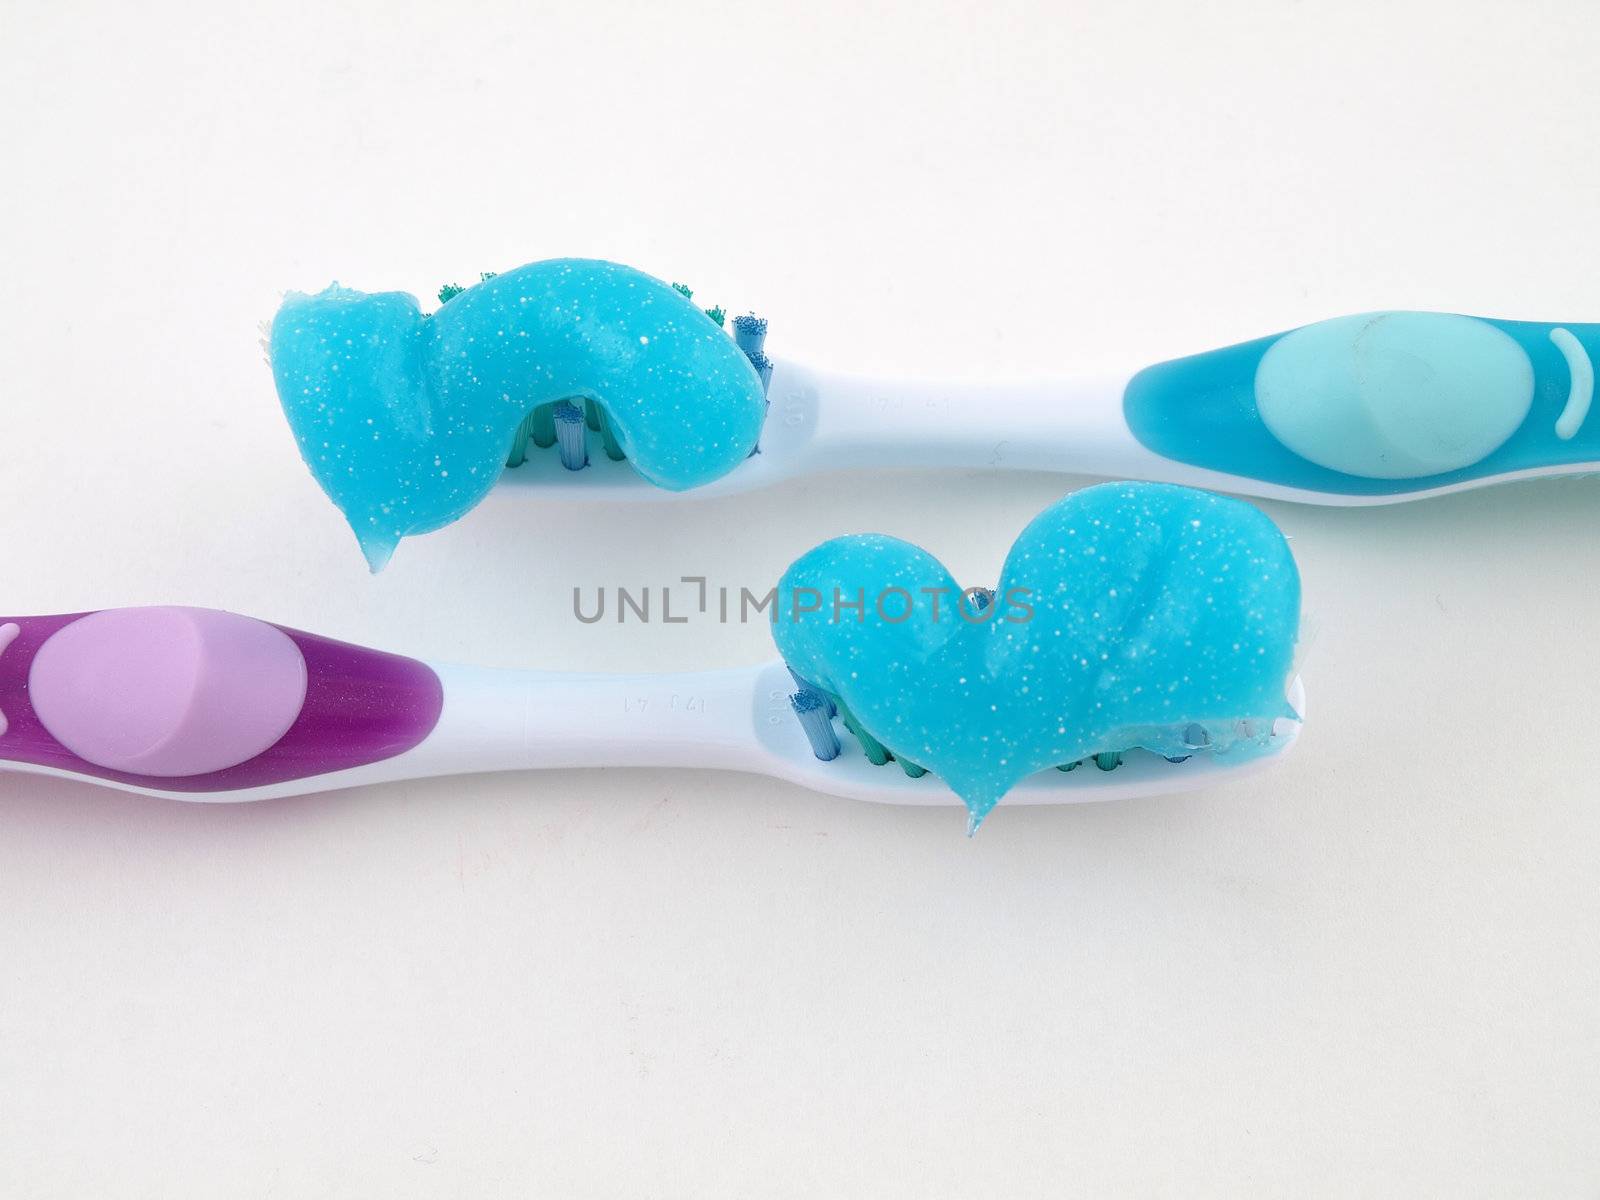 Two toothbrushes with a blue gel toothpaste over a white background.